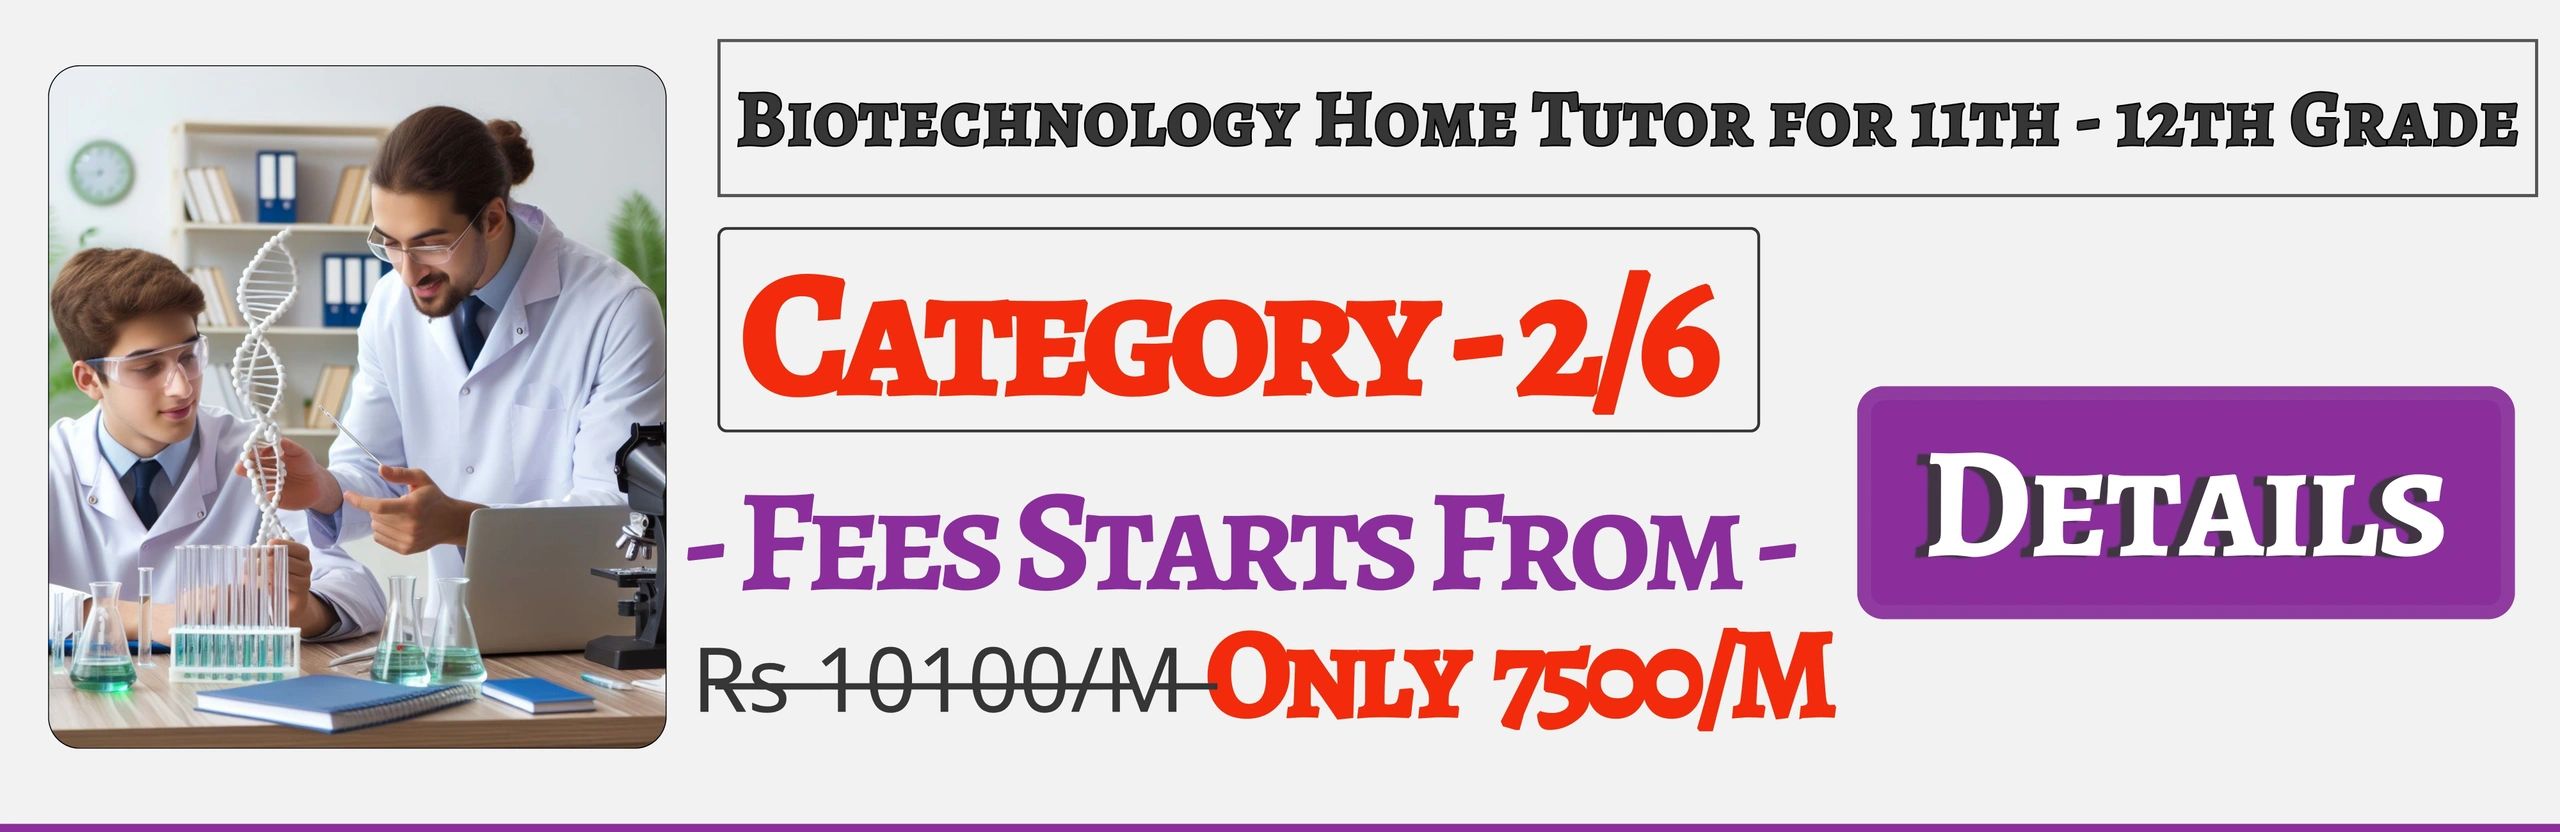 Book Best Nearby Biotechnology Home Tuition Tutors For 11th & 12th In Jaipur , Fees Only 7500/M